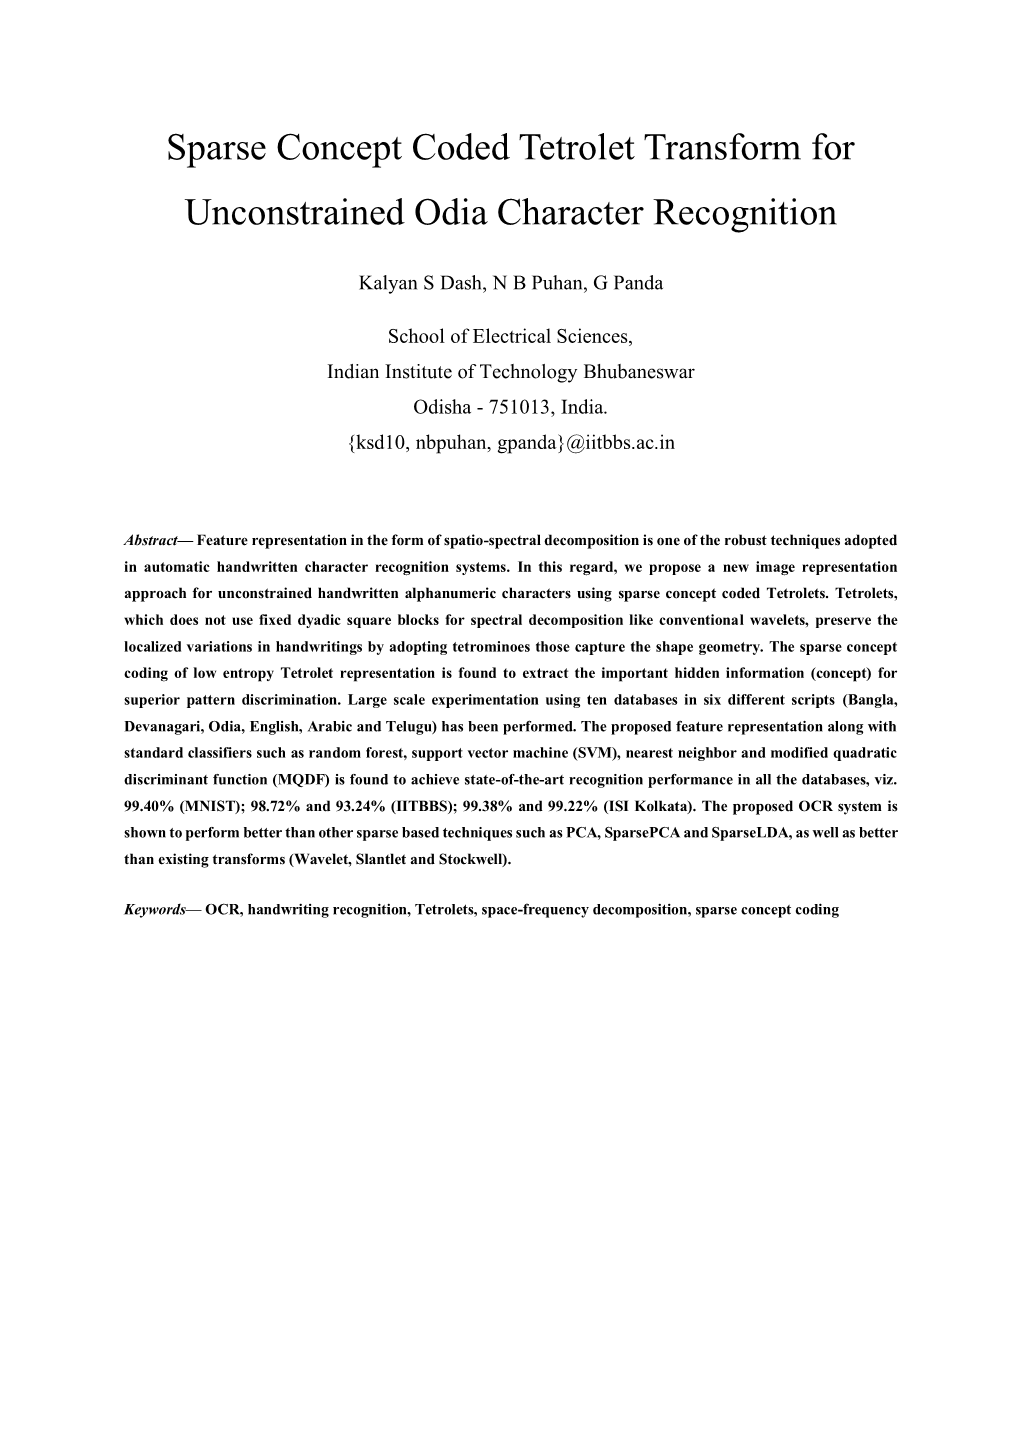 Sparse Concept Coded Tetrolet Transform for Unconstrained Odia Character Recognition